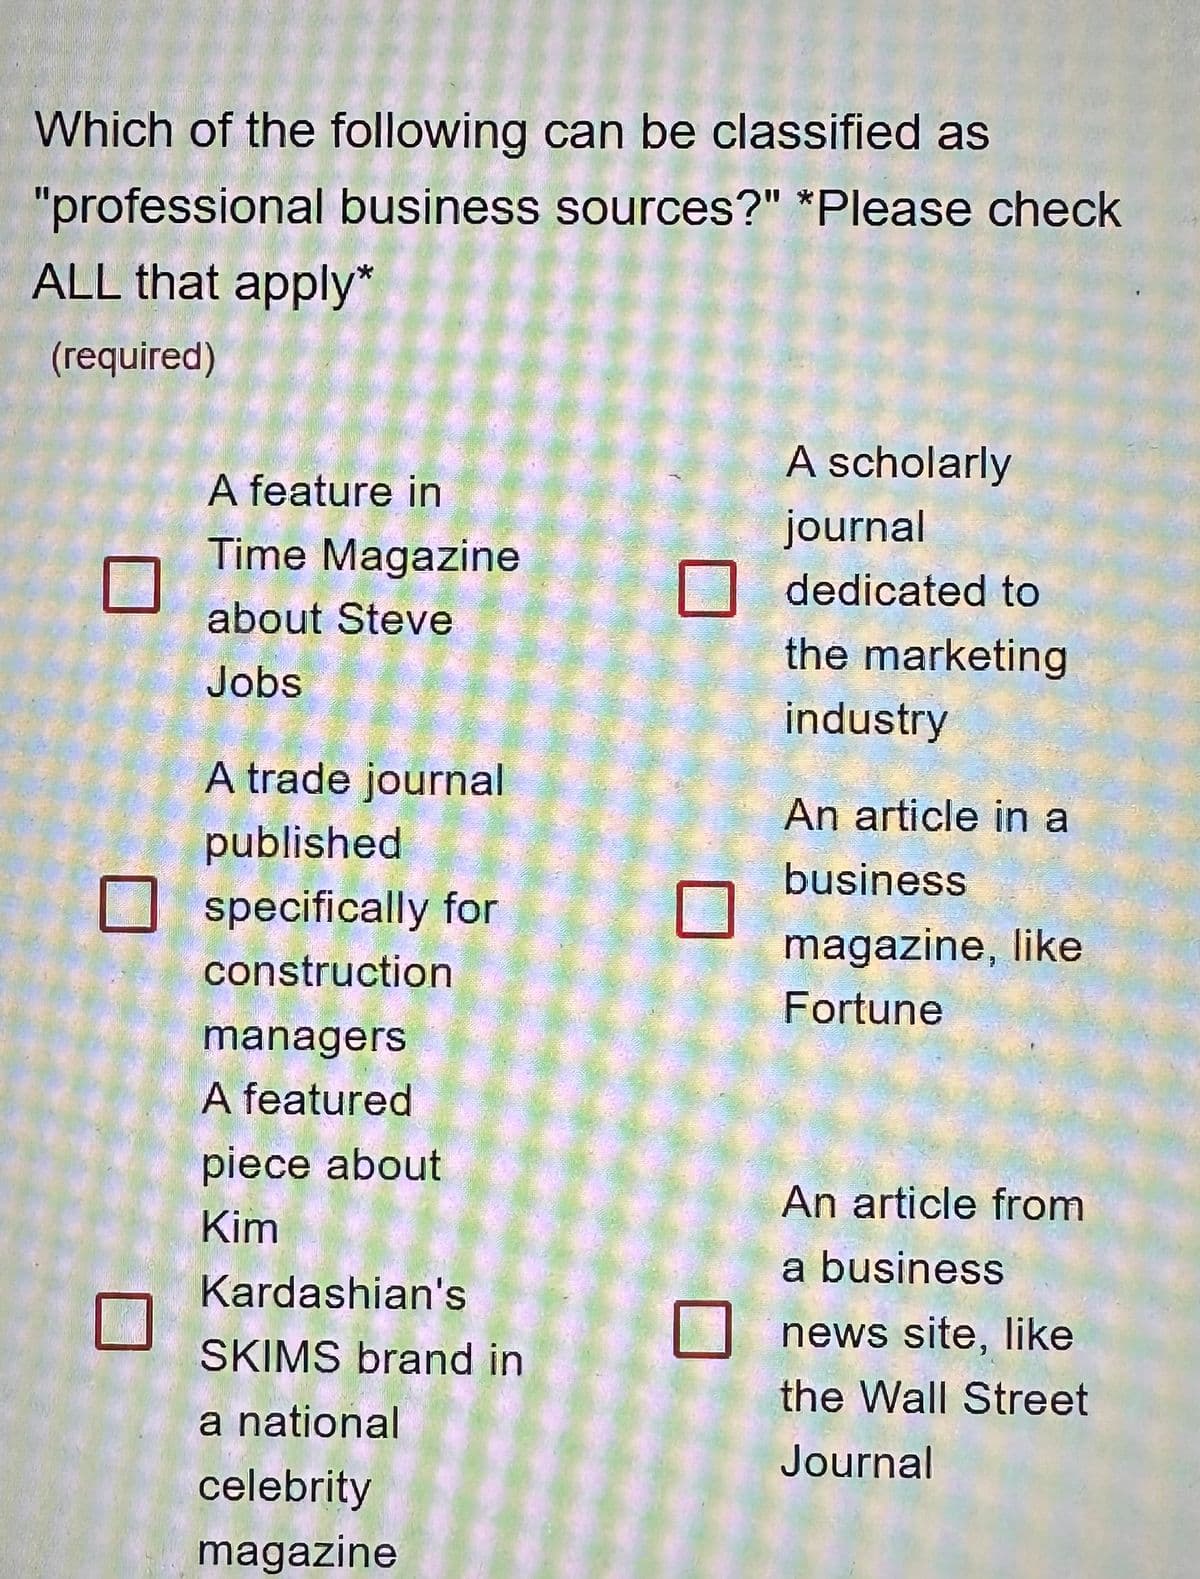 Which of the following can be classified as
"professional business sources?" *Please check
ALL that apply*
(required)
A feature in
Time Magazine
about Steve
Jobs
A trade journal
published
specifically for
construction
managers
A featured
piece about
Kim
Kardashian's
SKIMS brand in
a national
celebrity
magazine
A scholarly
journal
dedicated to
the marketing
industry
An article in a
business
magazine, like
Fortune
An article from
a business
news site, like
the Wall Street
Journal